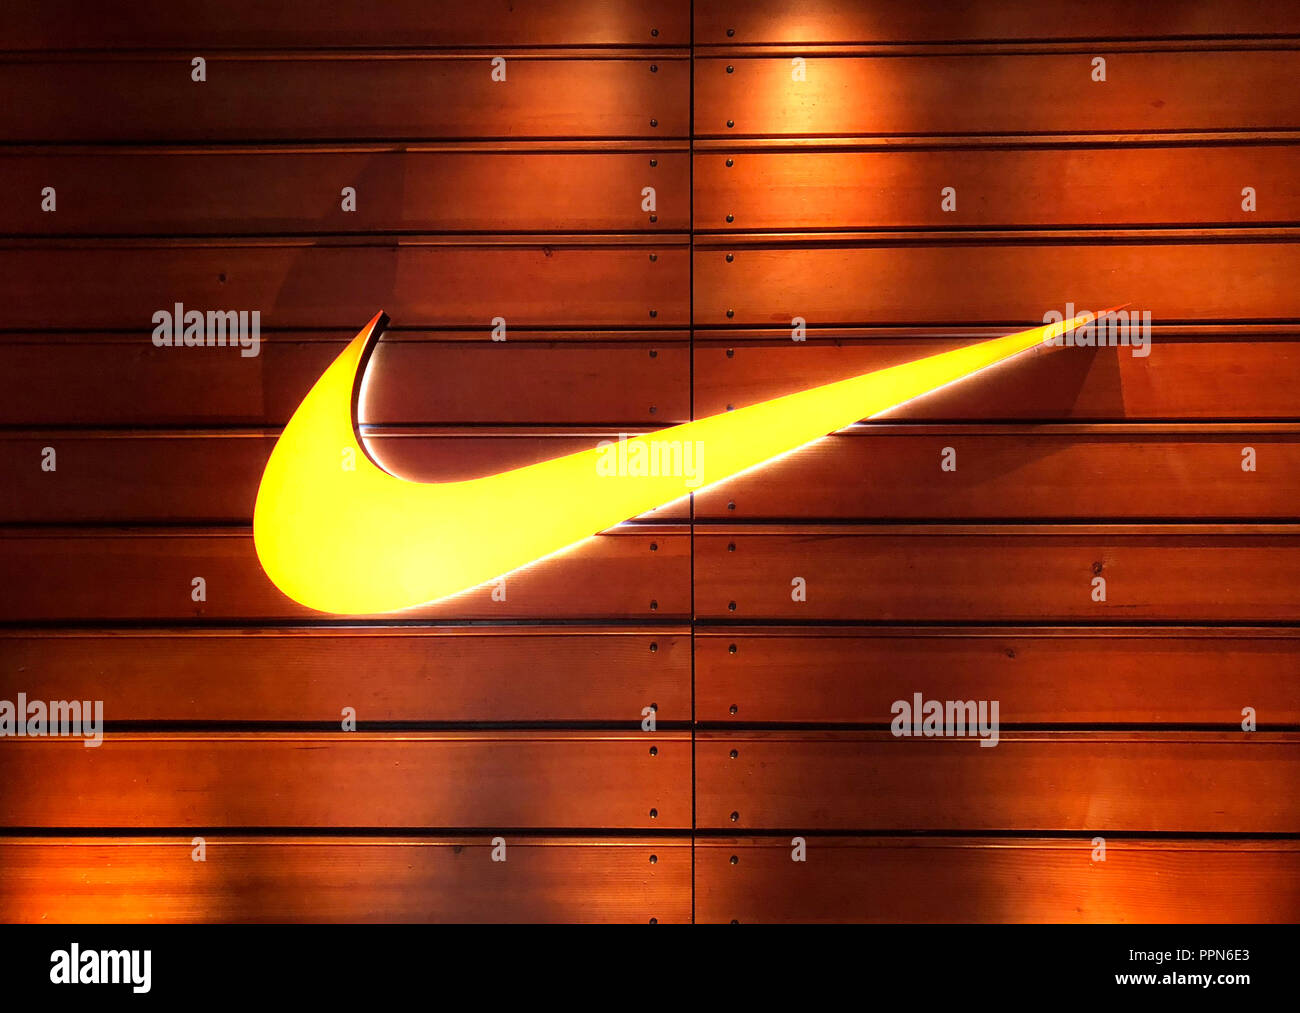 Nike logo ad High Resolution Stock Photography and Images - Alamy